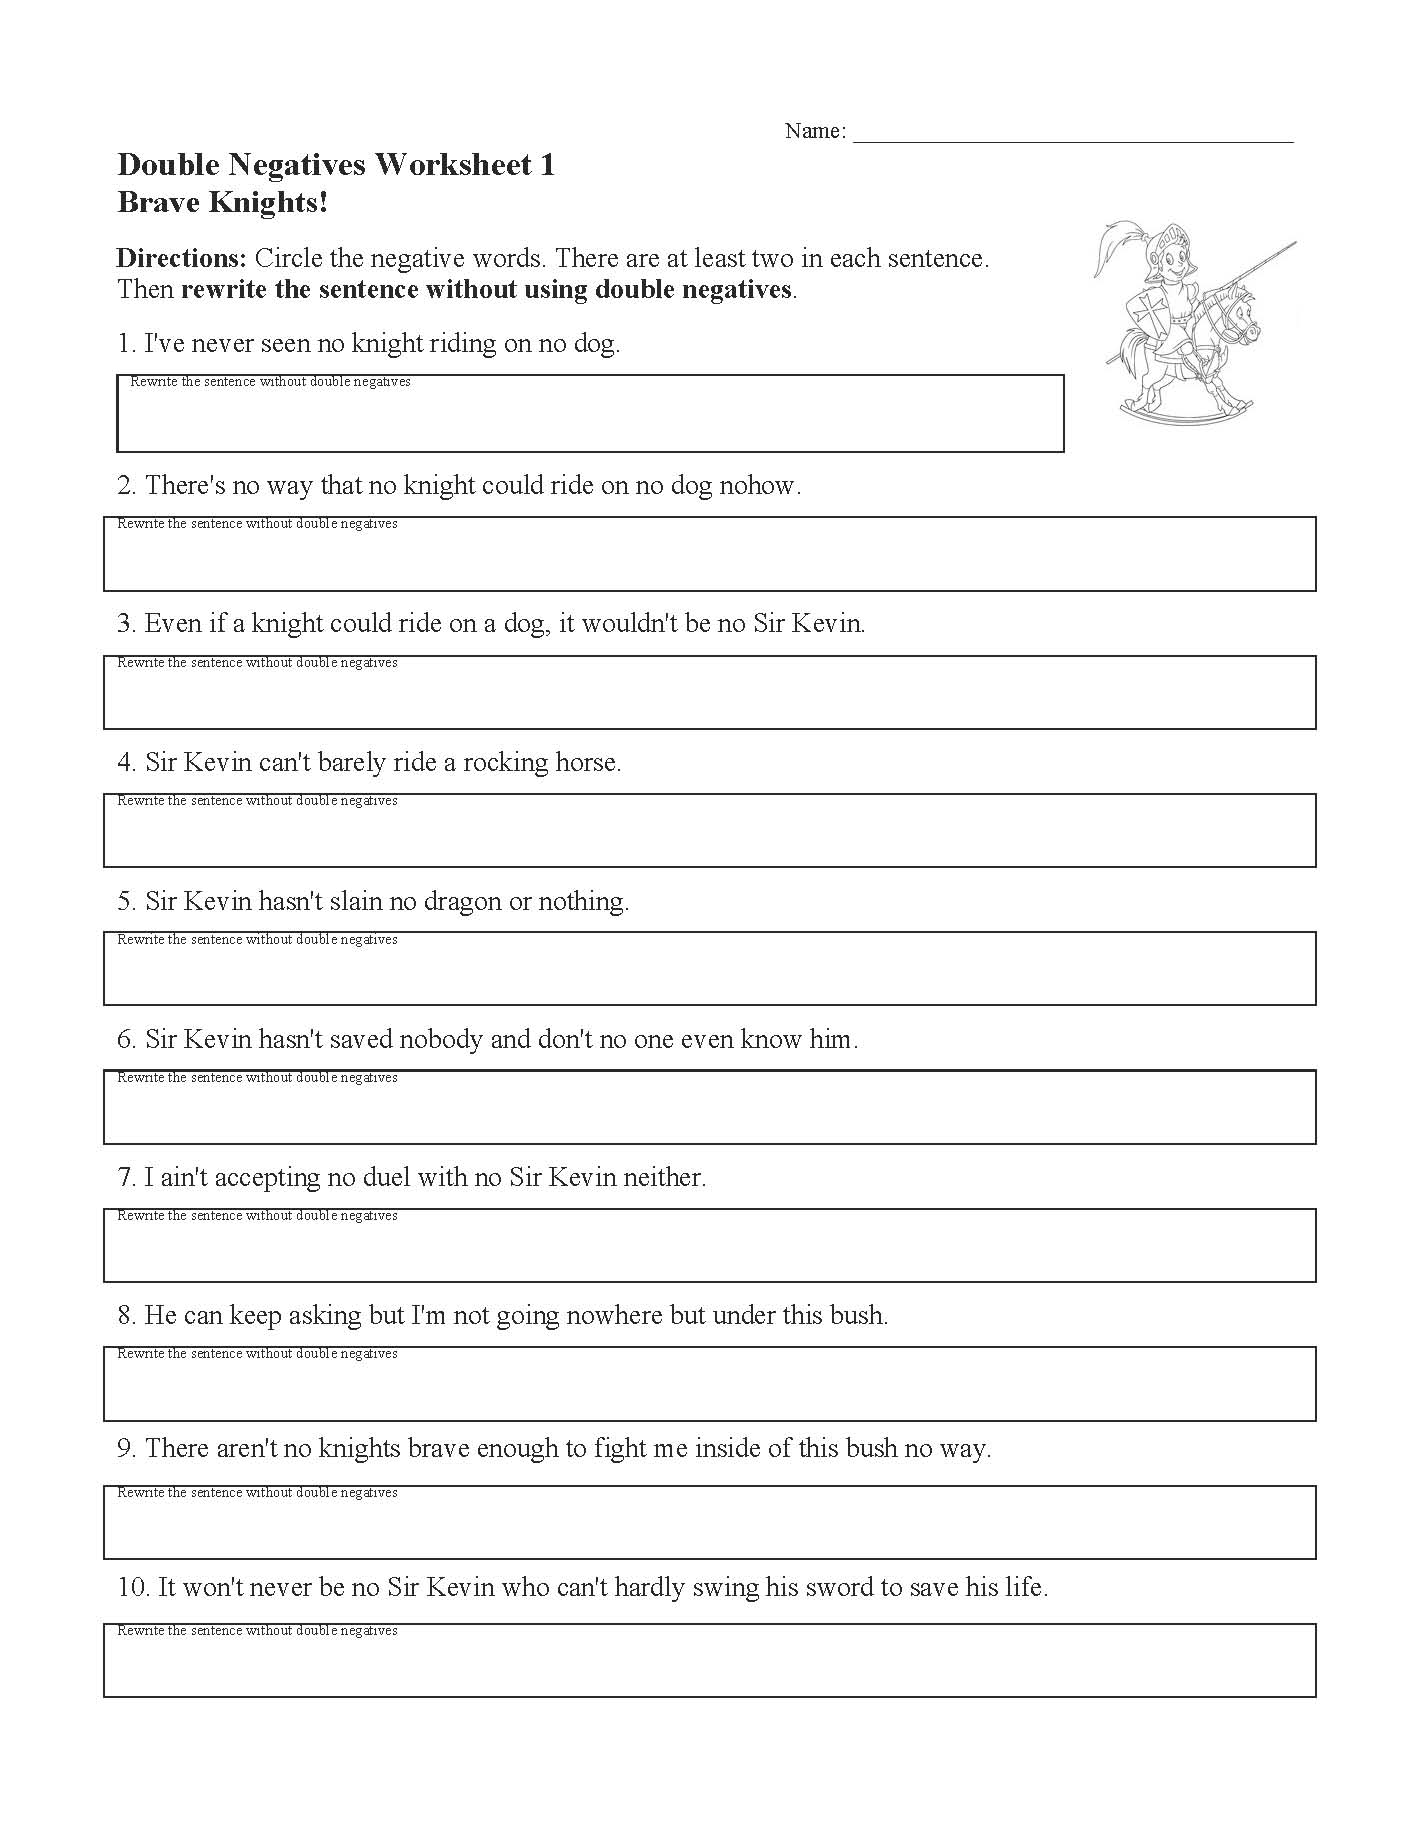 This is a preview image of Double Negatives Worksheet 1. Click on it to enlarge it or view the source file.